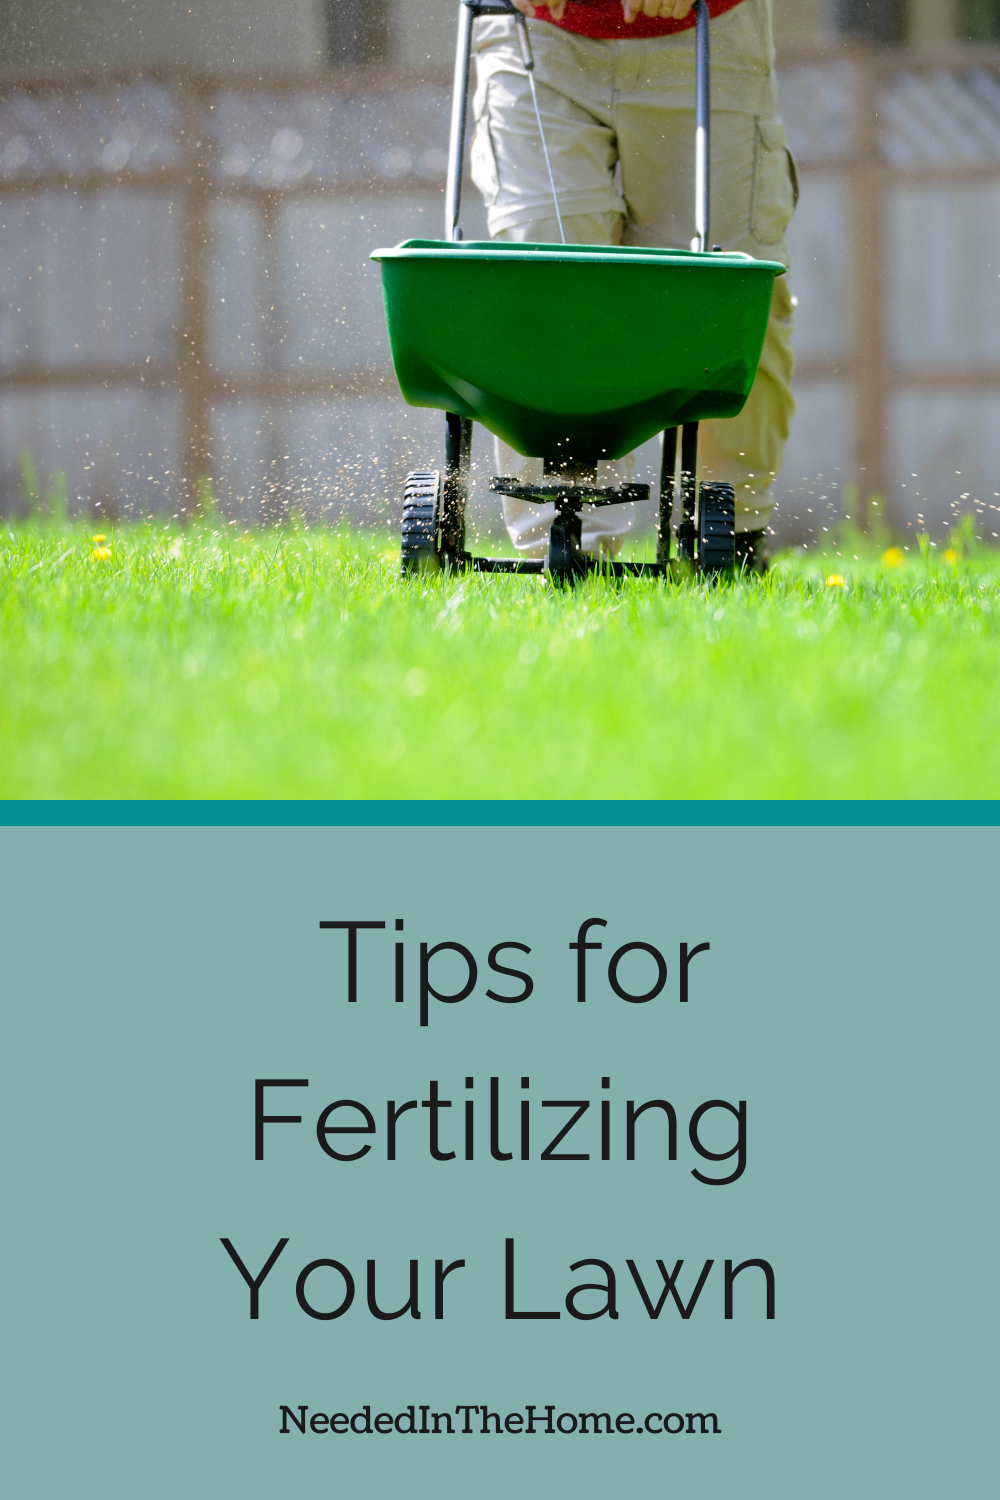 pinterest pin description tips for fertilizing your lawn man spreading fertilizer granules on lawn with green spreader neededinthehome